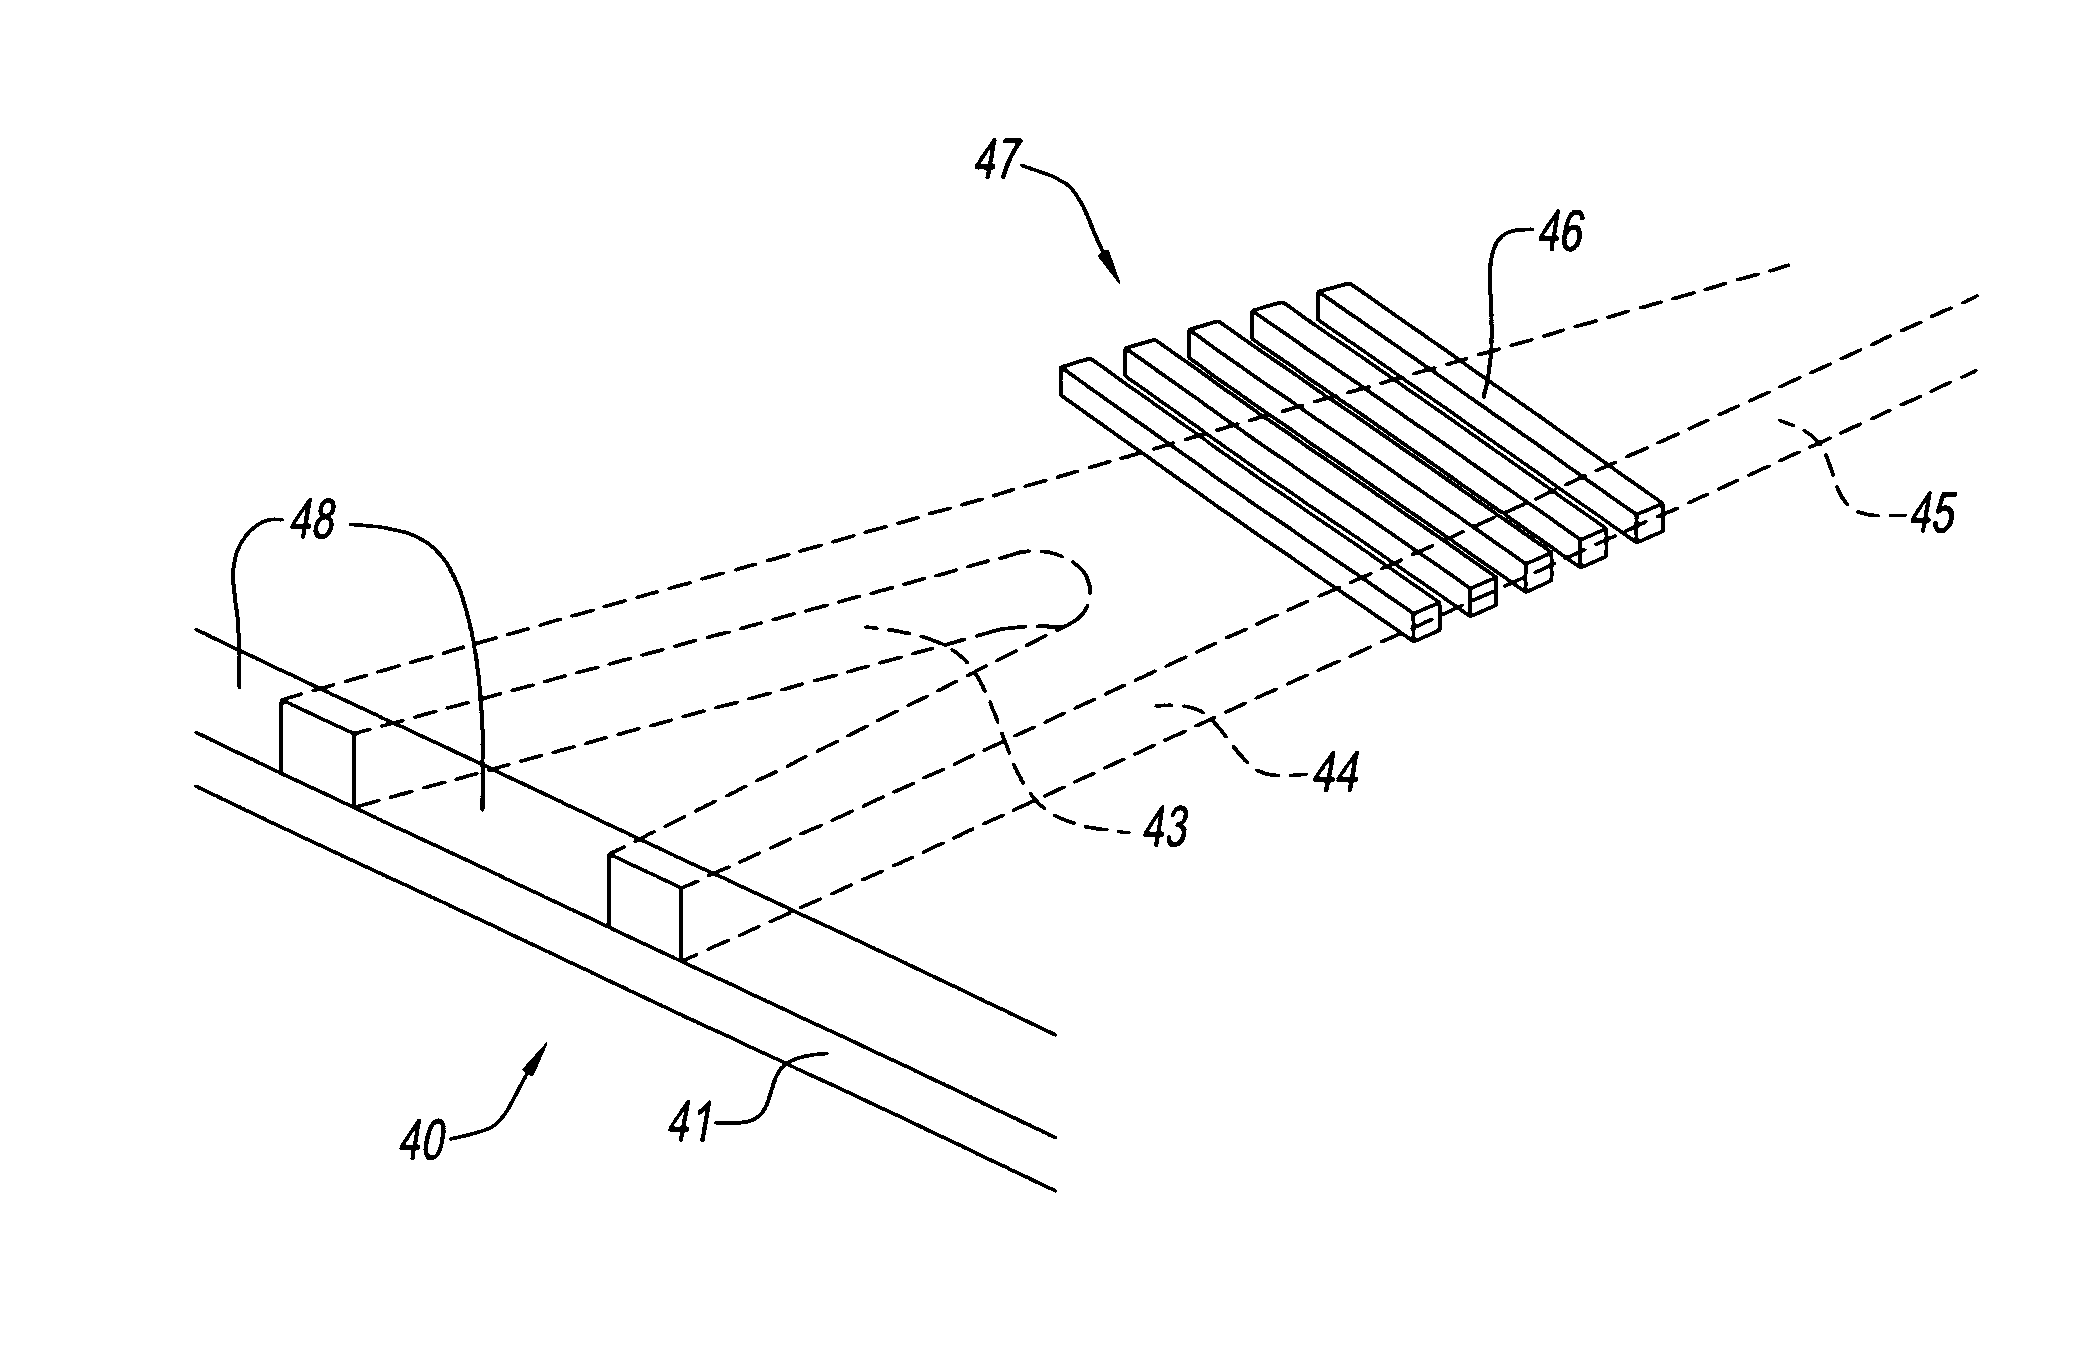 Optical waveguides and grating structures fabricated using polymeric dielectric compositions